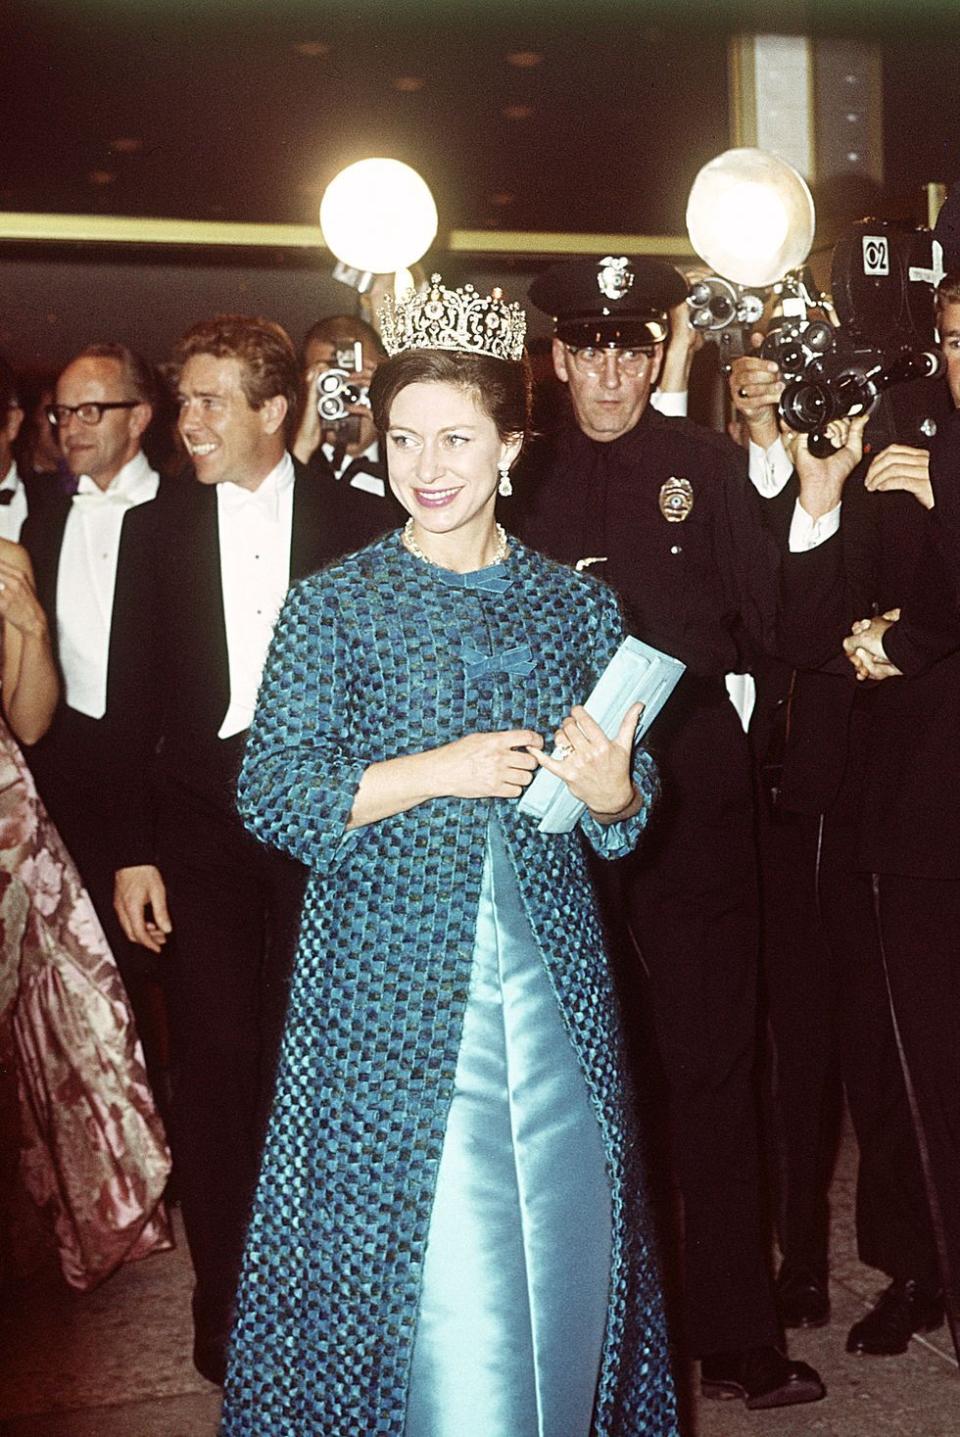 <p>Princess Margaret followed by Lord Snowdon leaving the Hollywood Palladium in Los Angeles during their visit to America in 1965. The Princess wears a blue dress and coat, topped with a stunning tiara.</p>